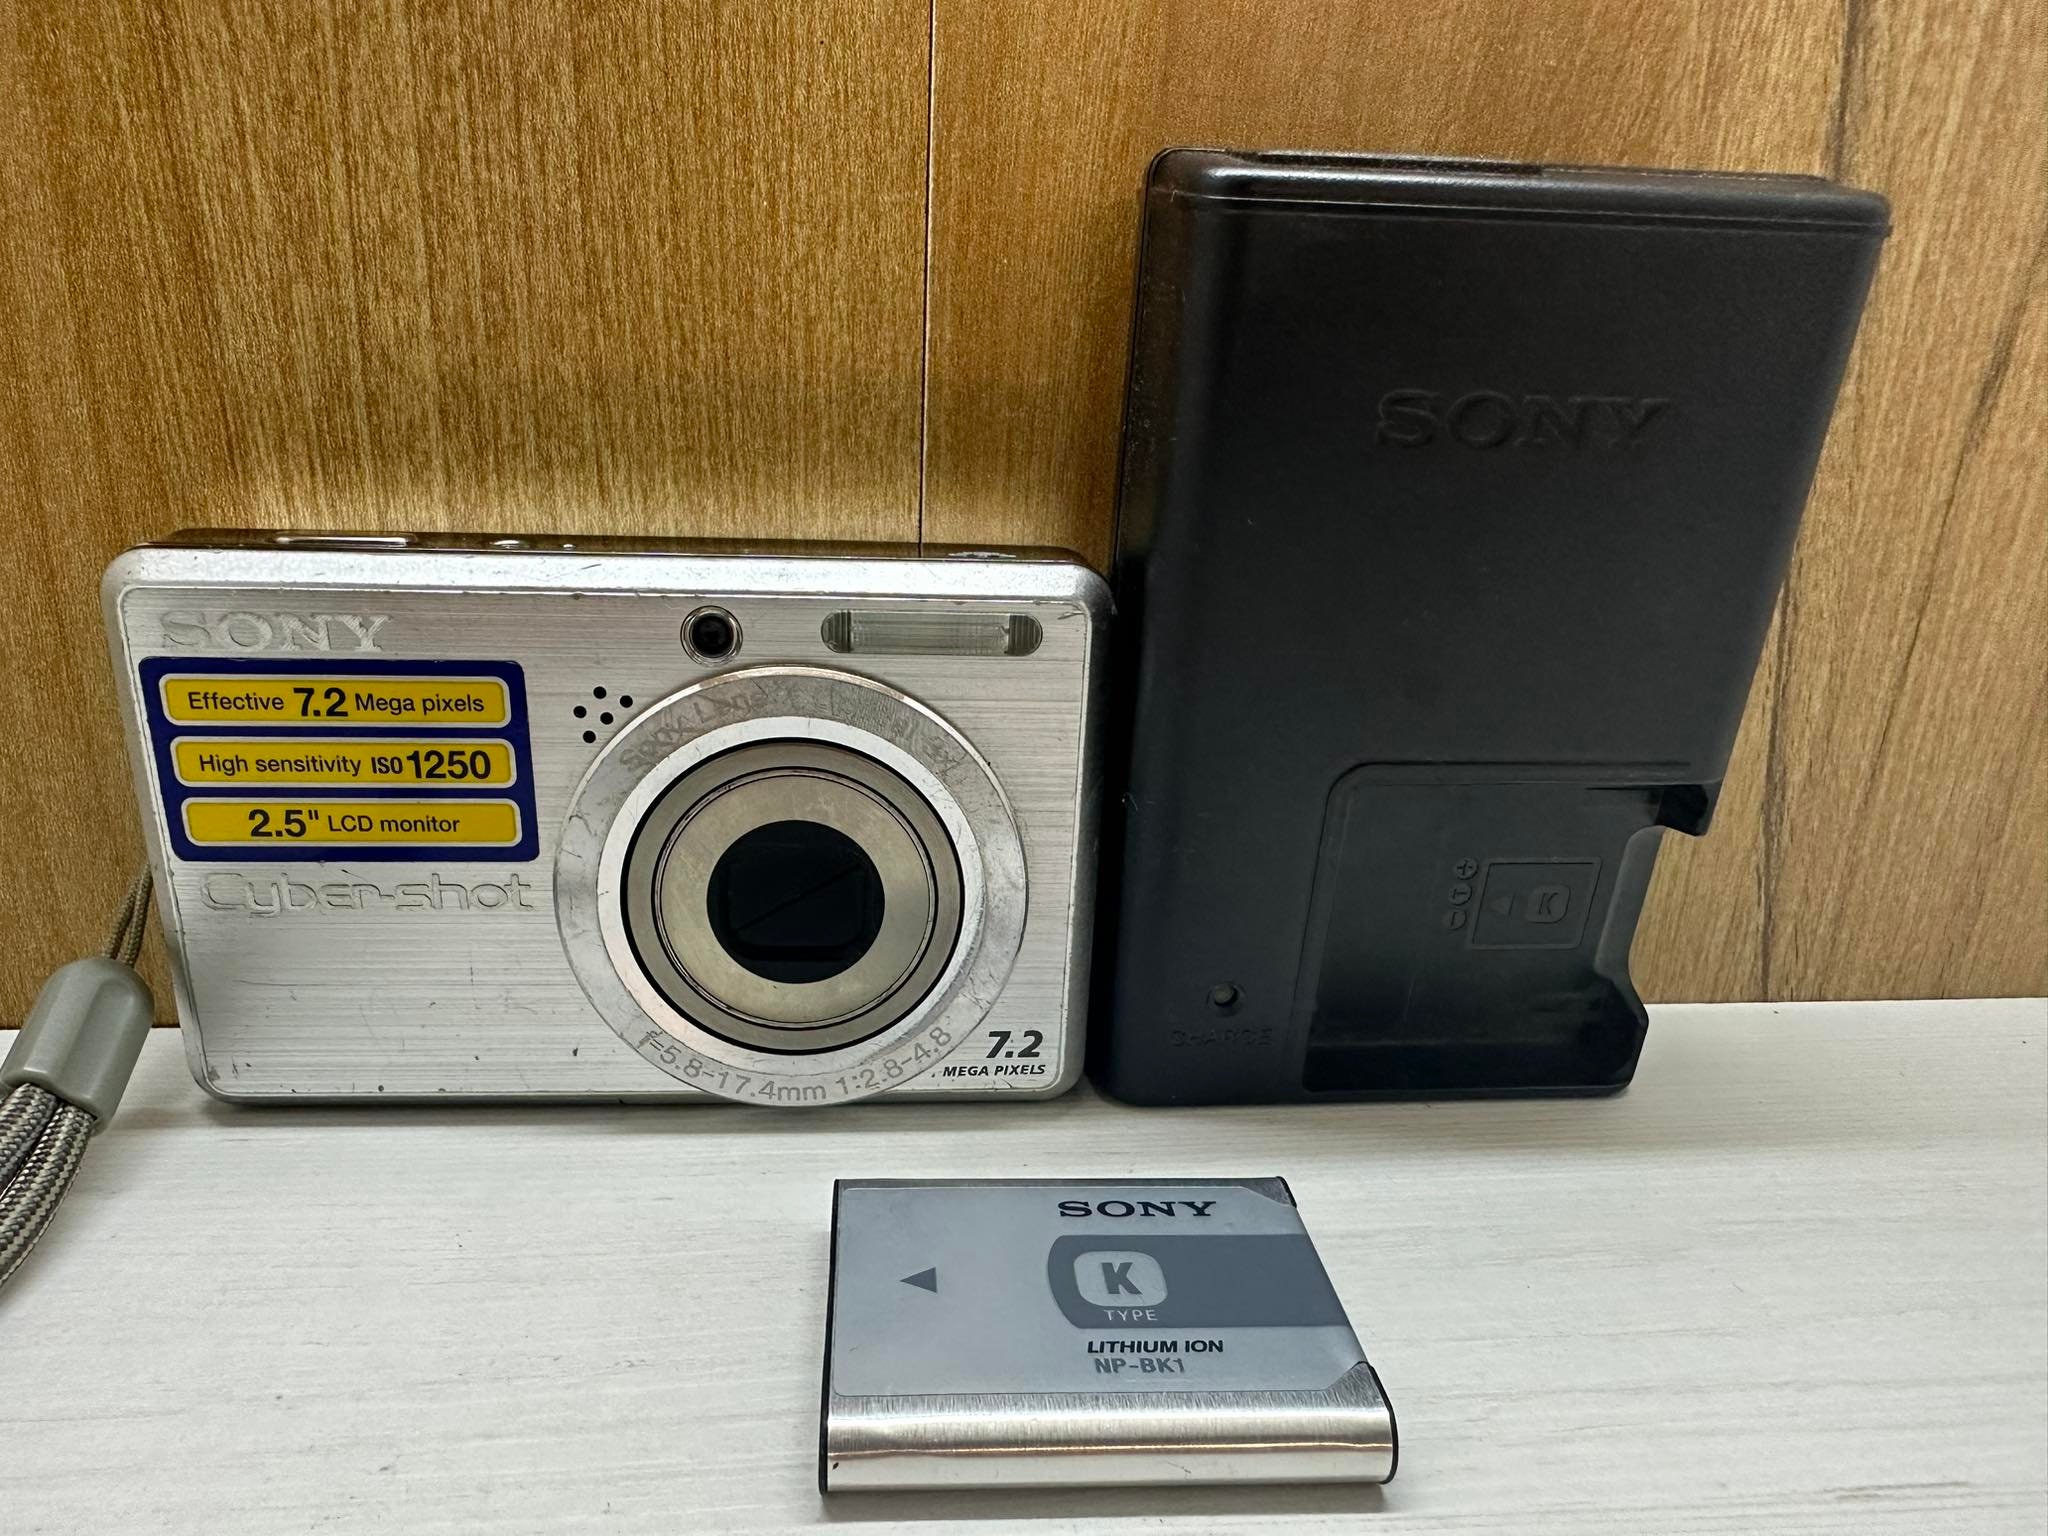 Sony Cyber-Shot Digital Camera DSC-S750 w/ Battery and Charger